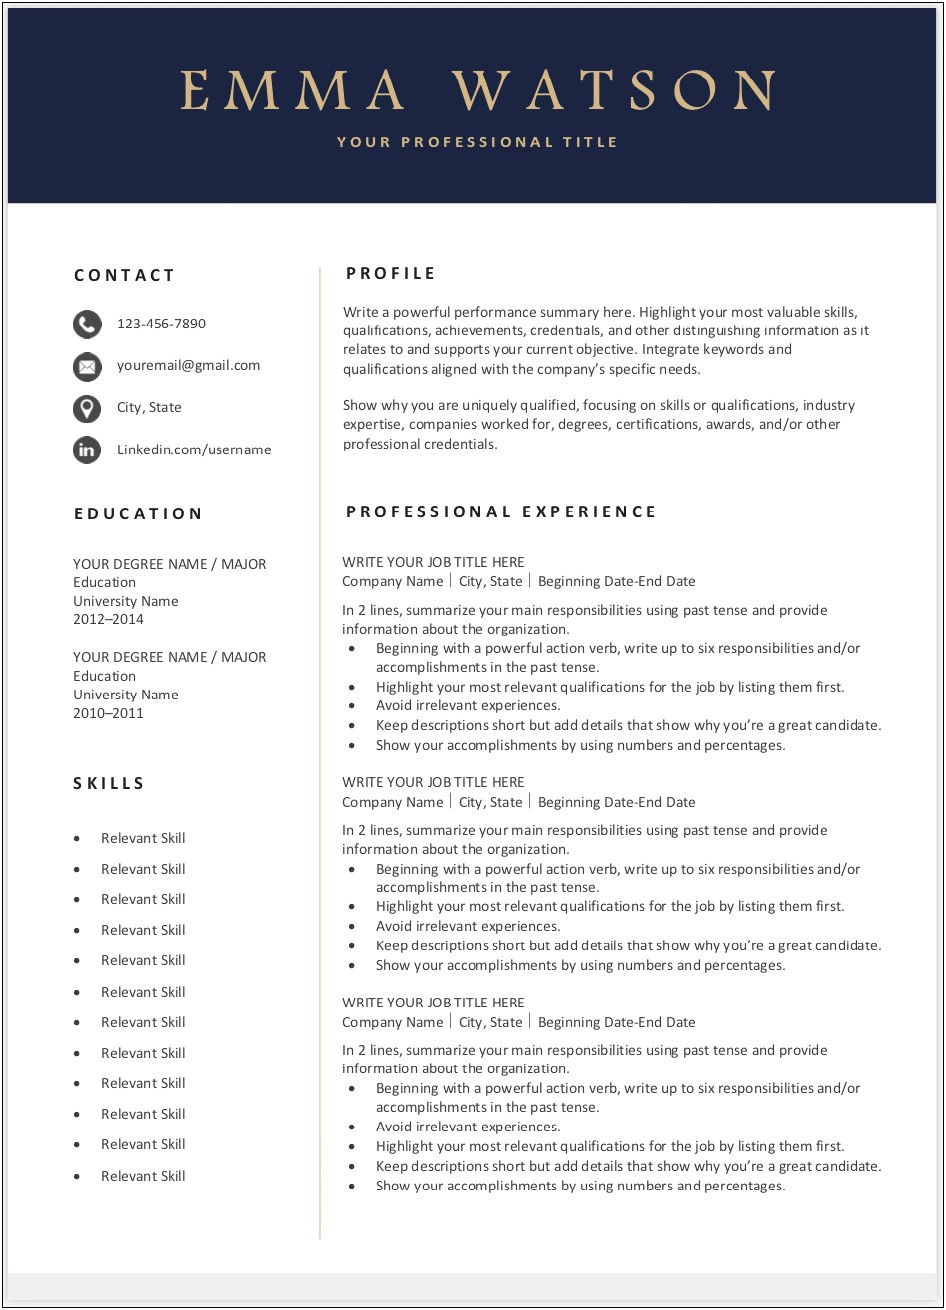 Free Professional Templates For Resume